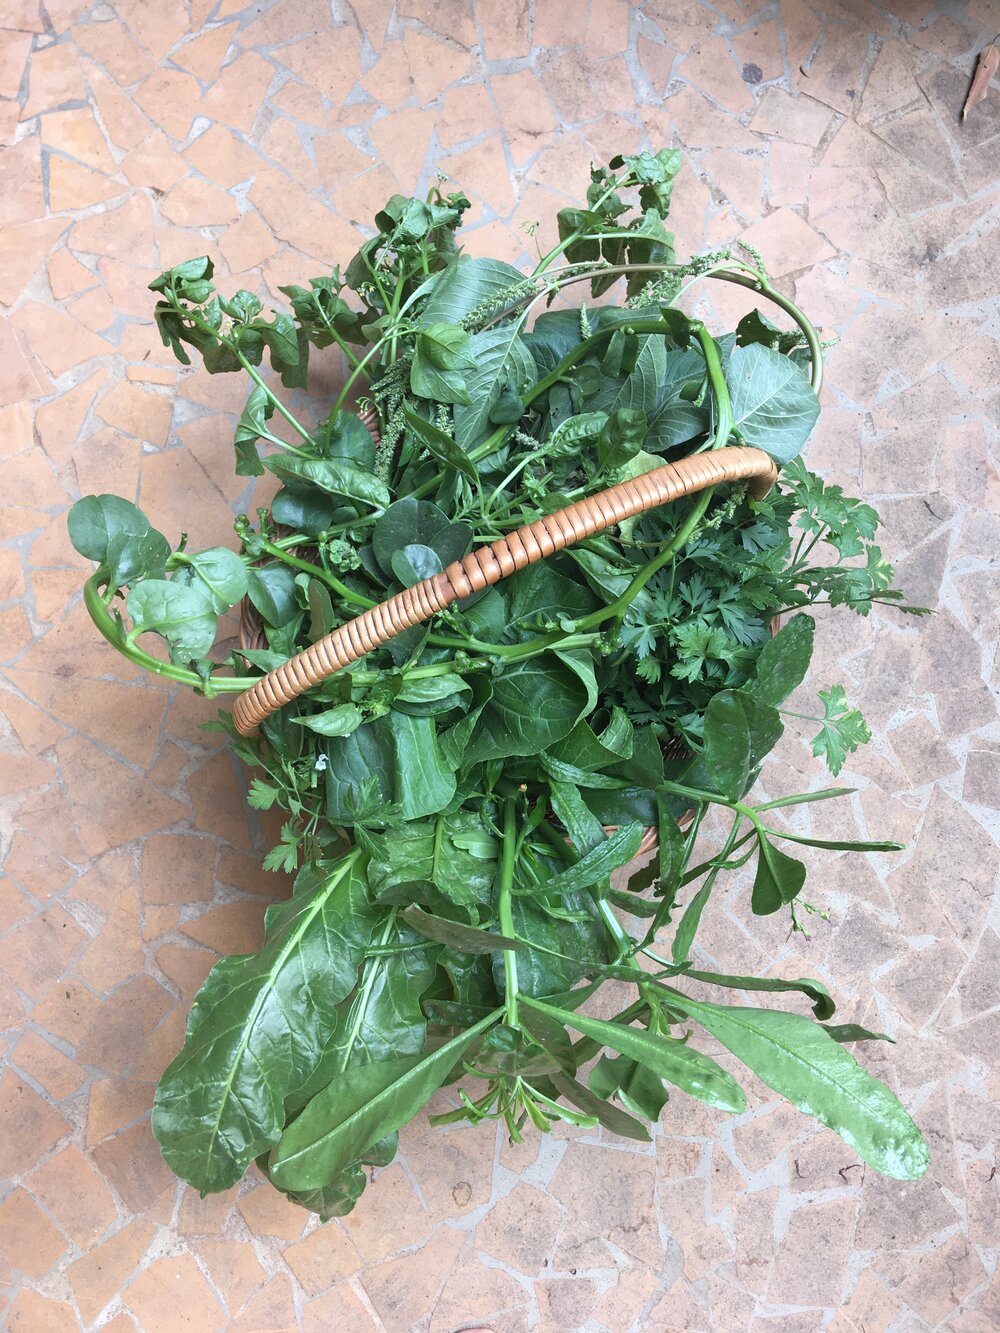  Greens are the easiest to get started with - here we have a mix of annuals, perennials and wild plants - Basella, Gongura, Parsley, Talinum, Basil, Wild Amaranth, Nightshade and Swiss Chard  